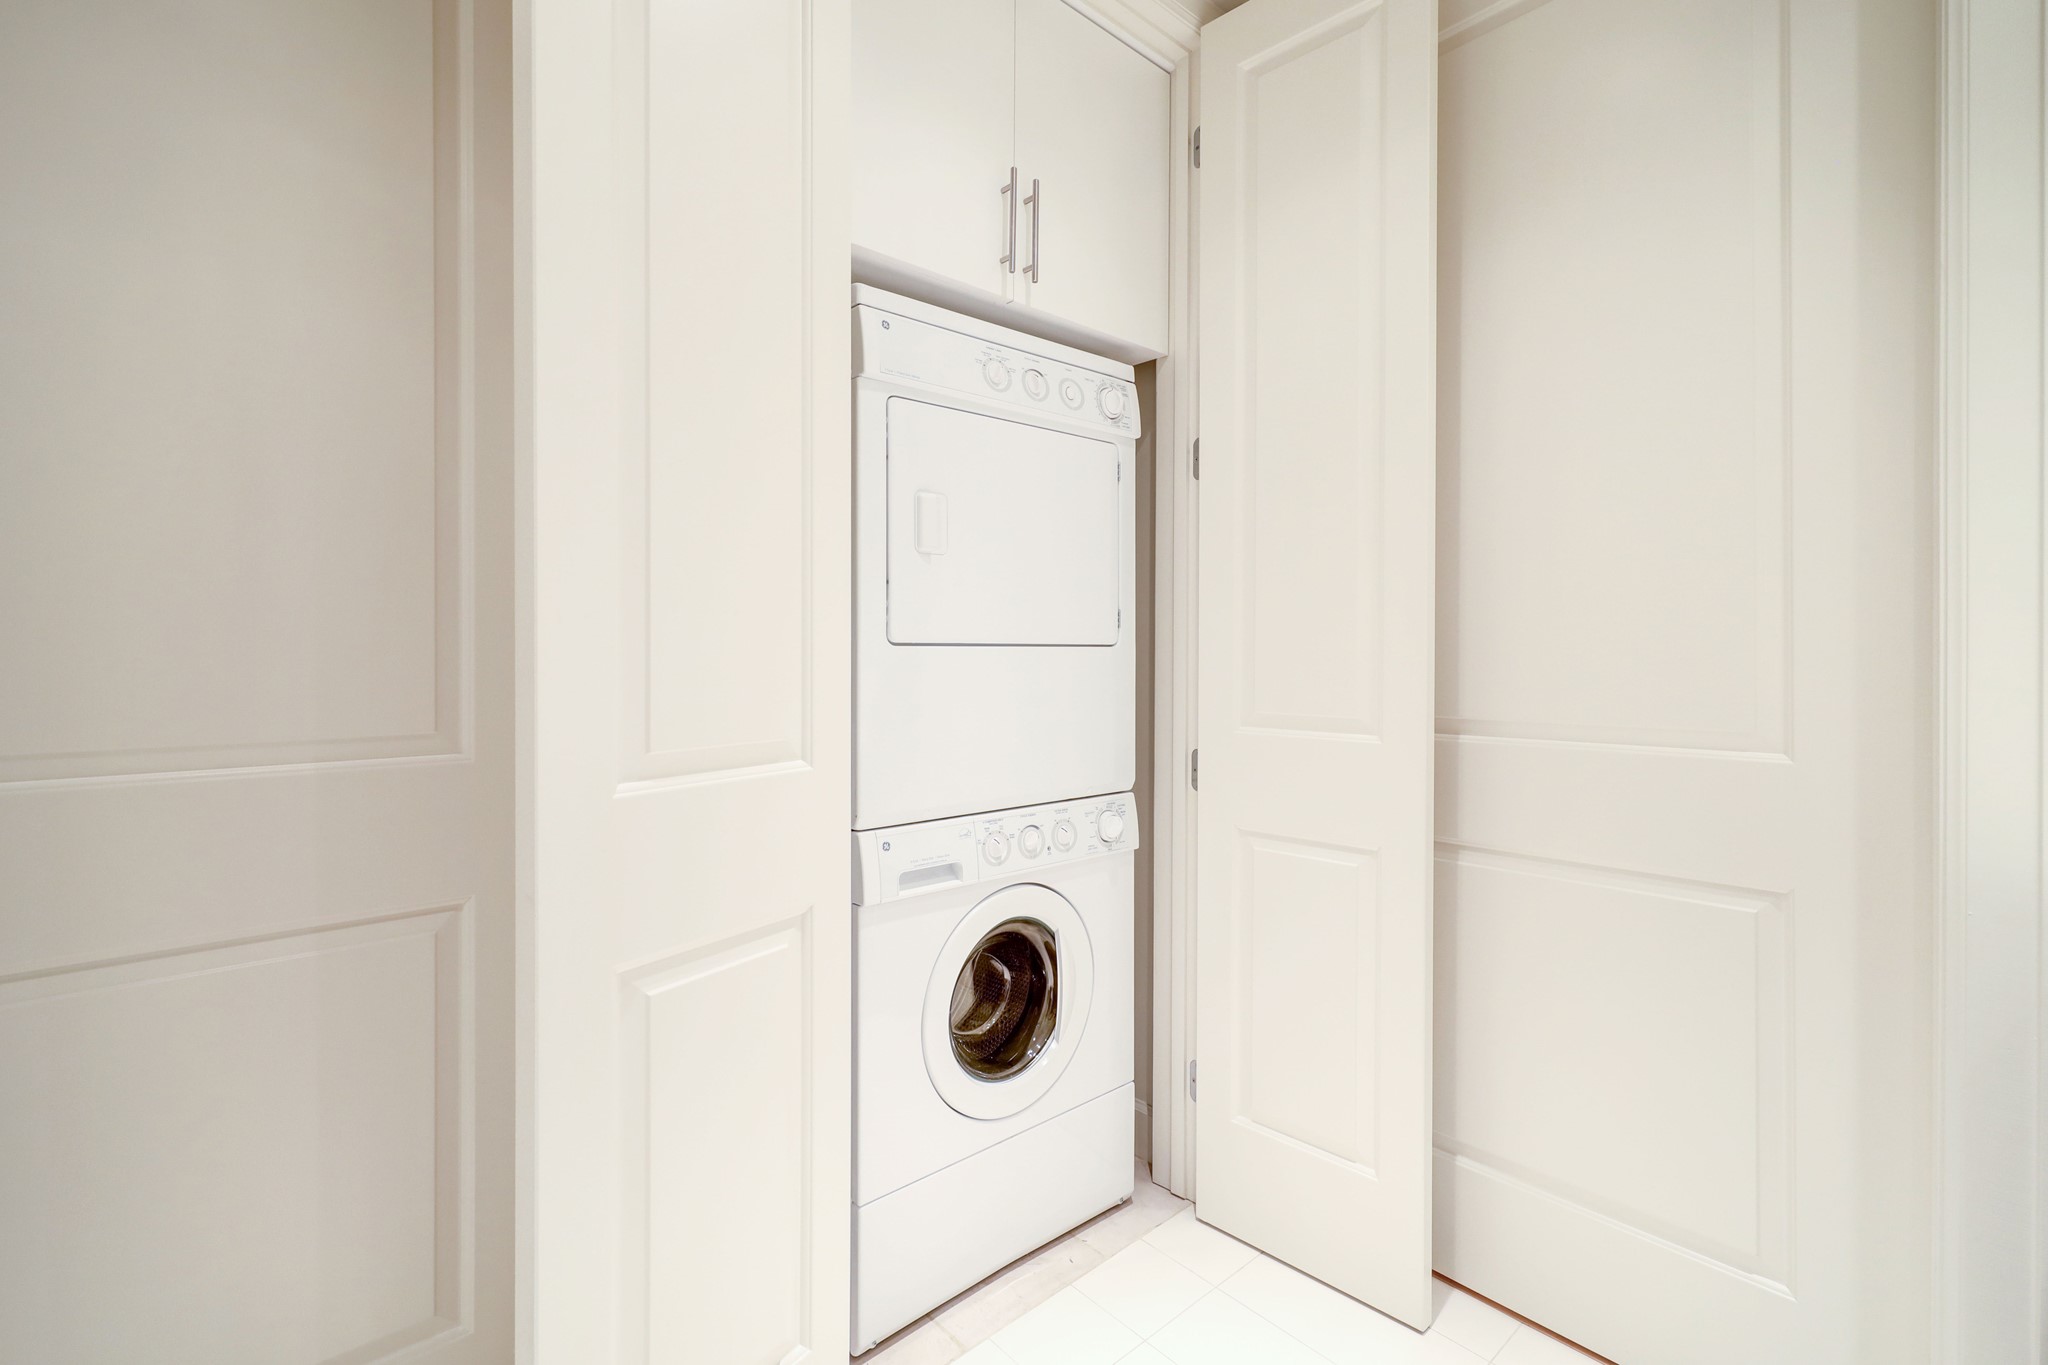 Washer and Dryer Will Stay and Are Tucked In Behind a Door in the Bathroom for Total Privacy.